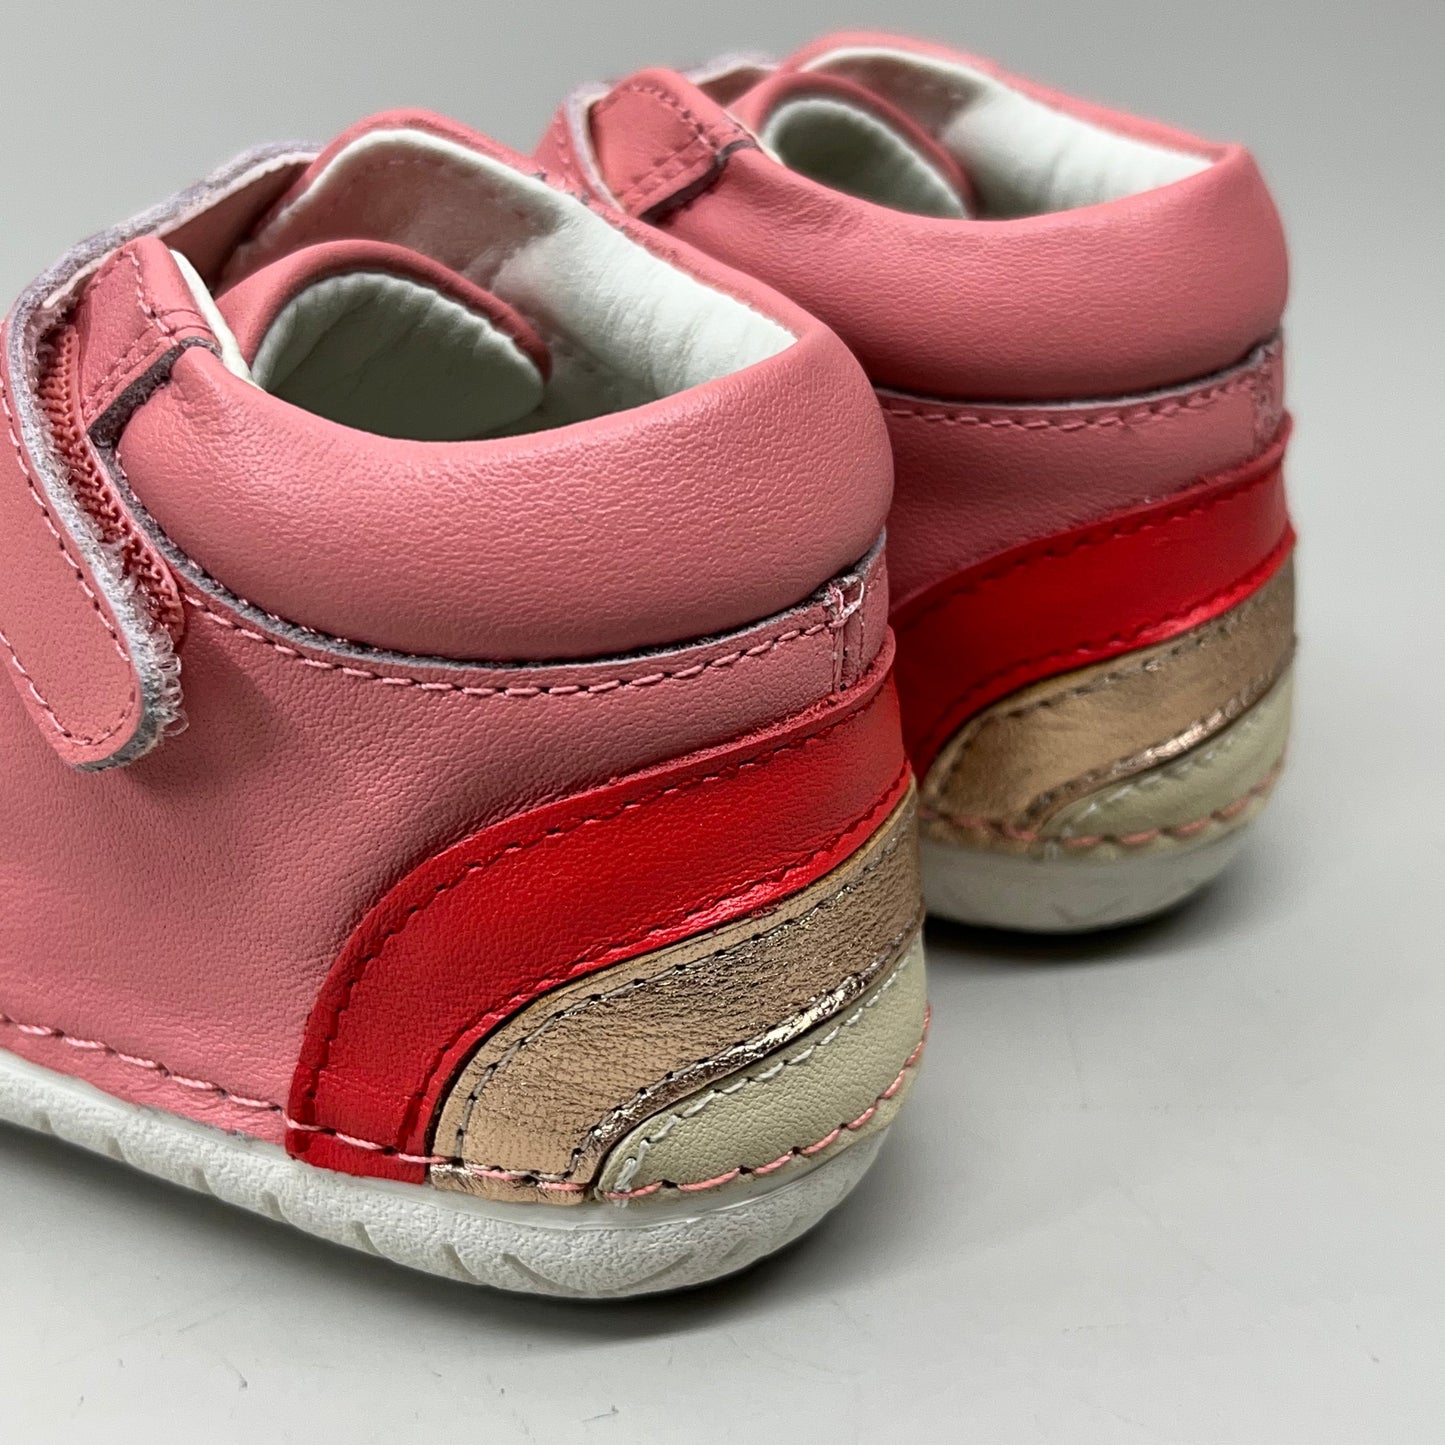 OLD SOLES Baby Rainbow Champster Leather Shoe Sz 24 US 8 Rossini/Red/Copper/Cream #4091